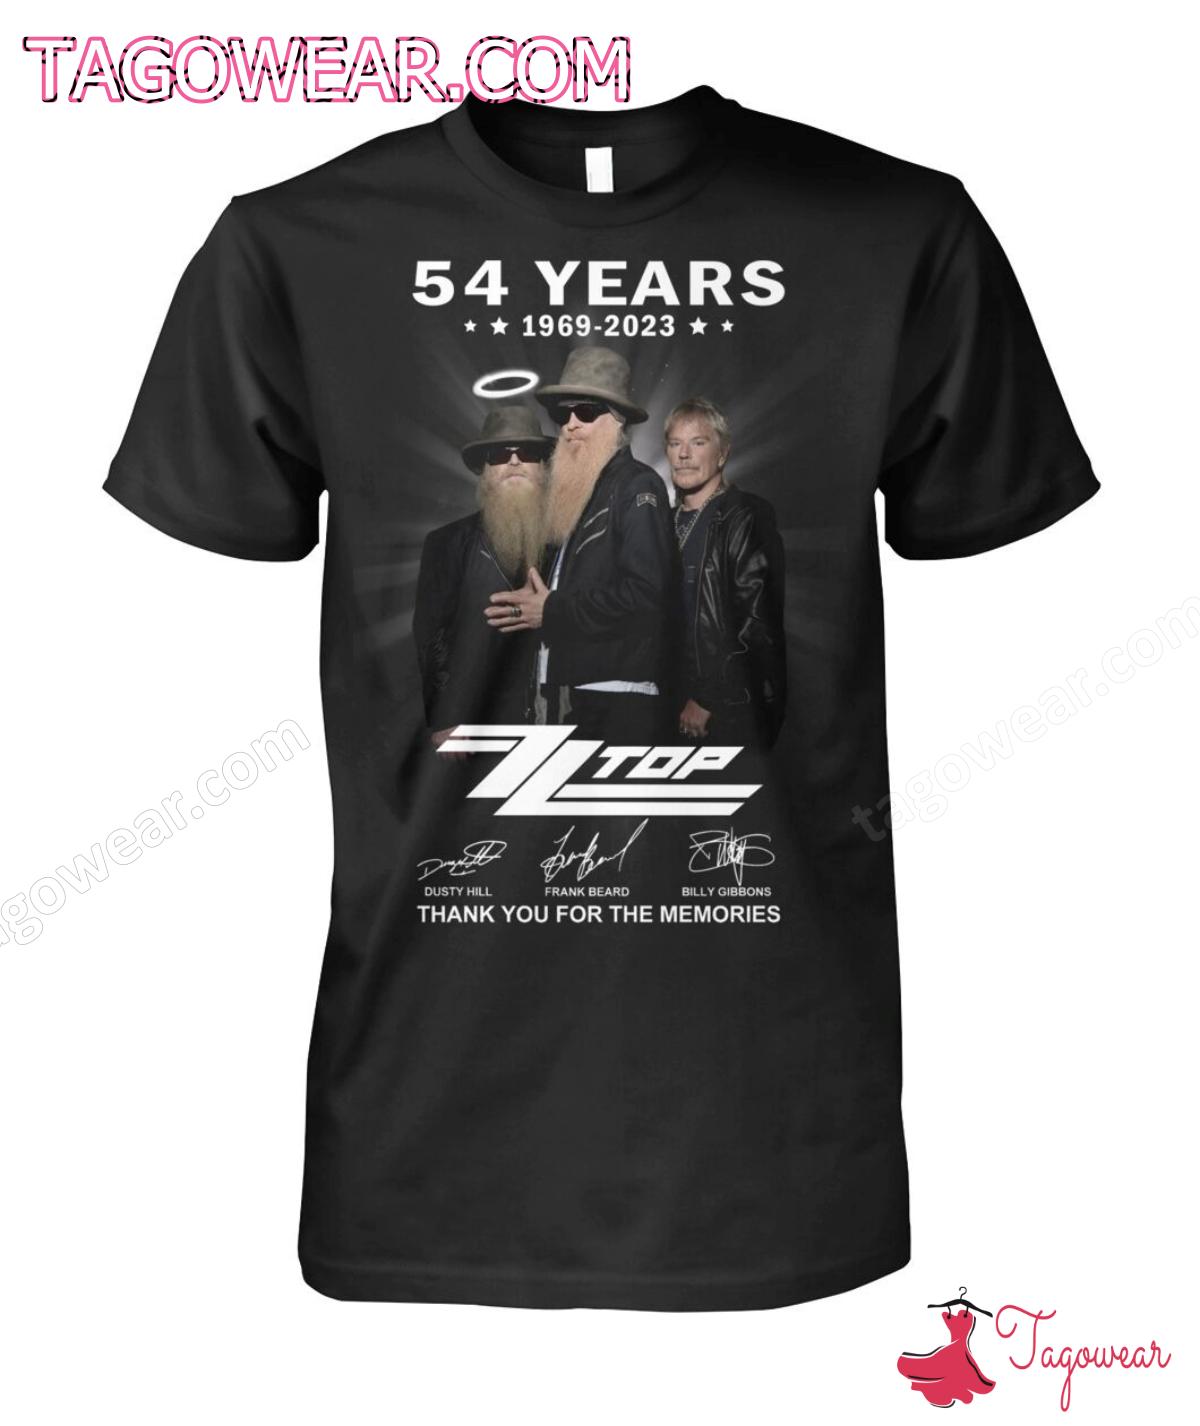 Zz Top Band 54 Years 1969-2023 Signatures Thank You For The Memories Shirt